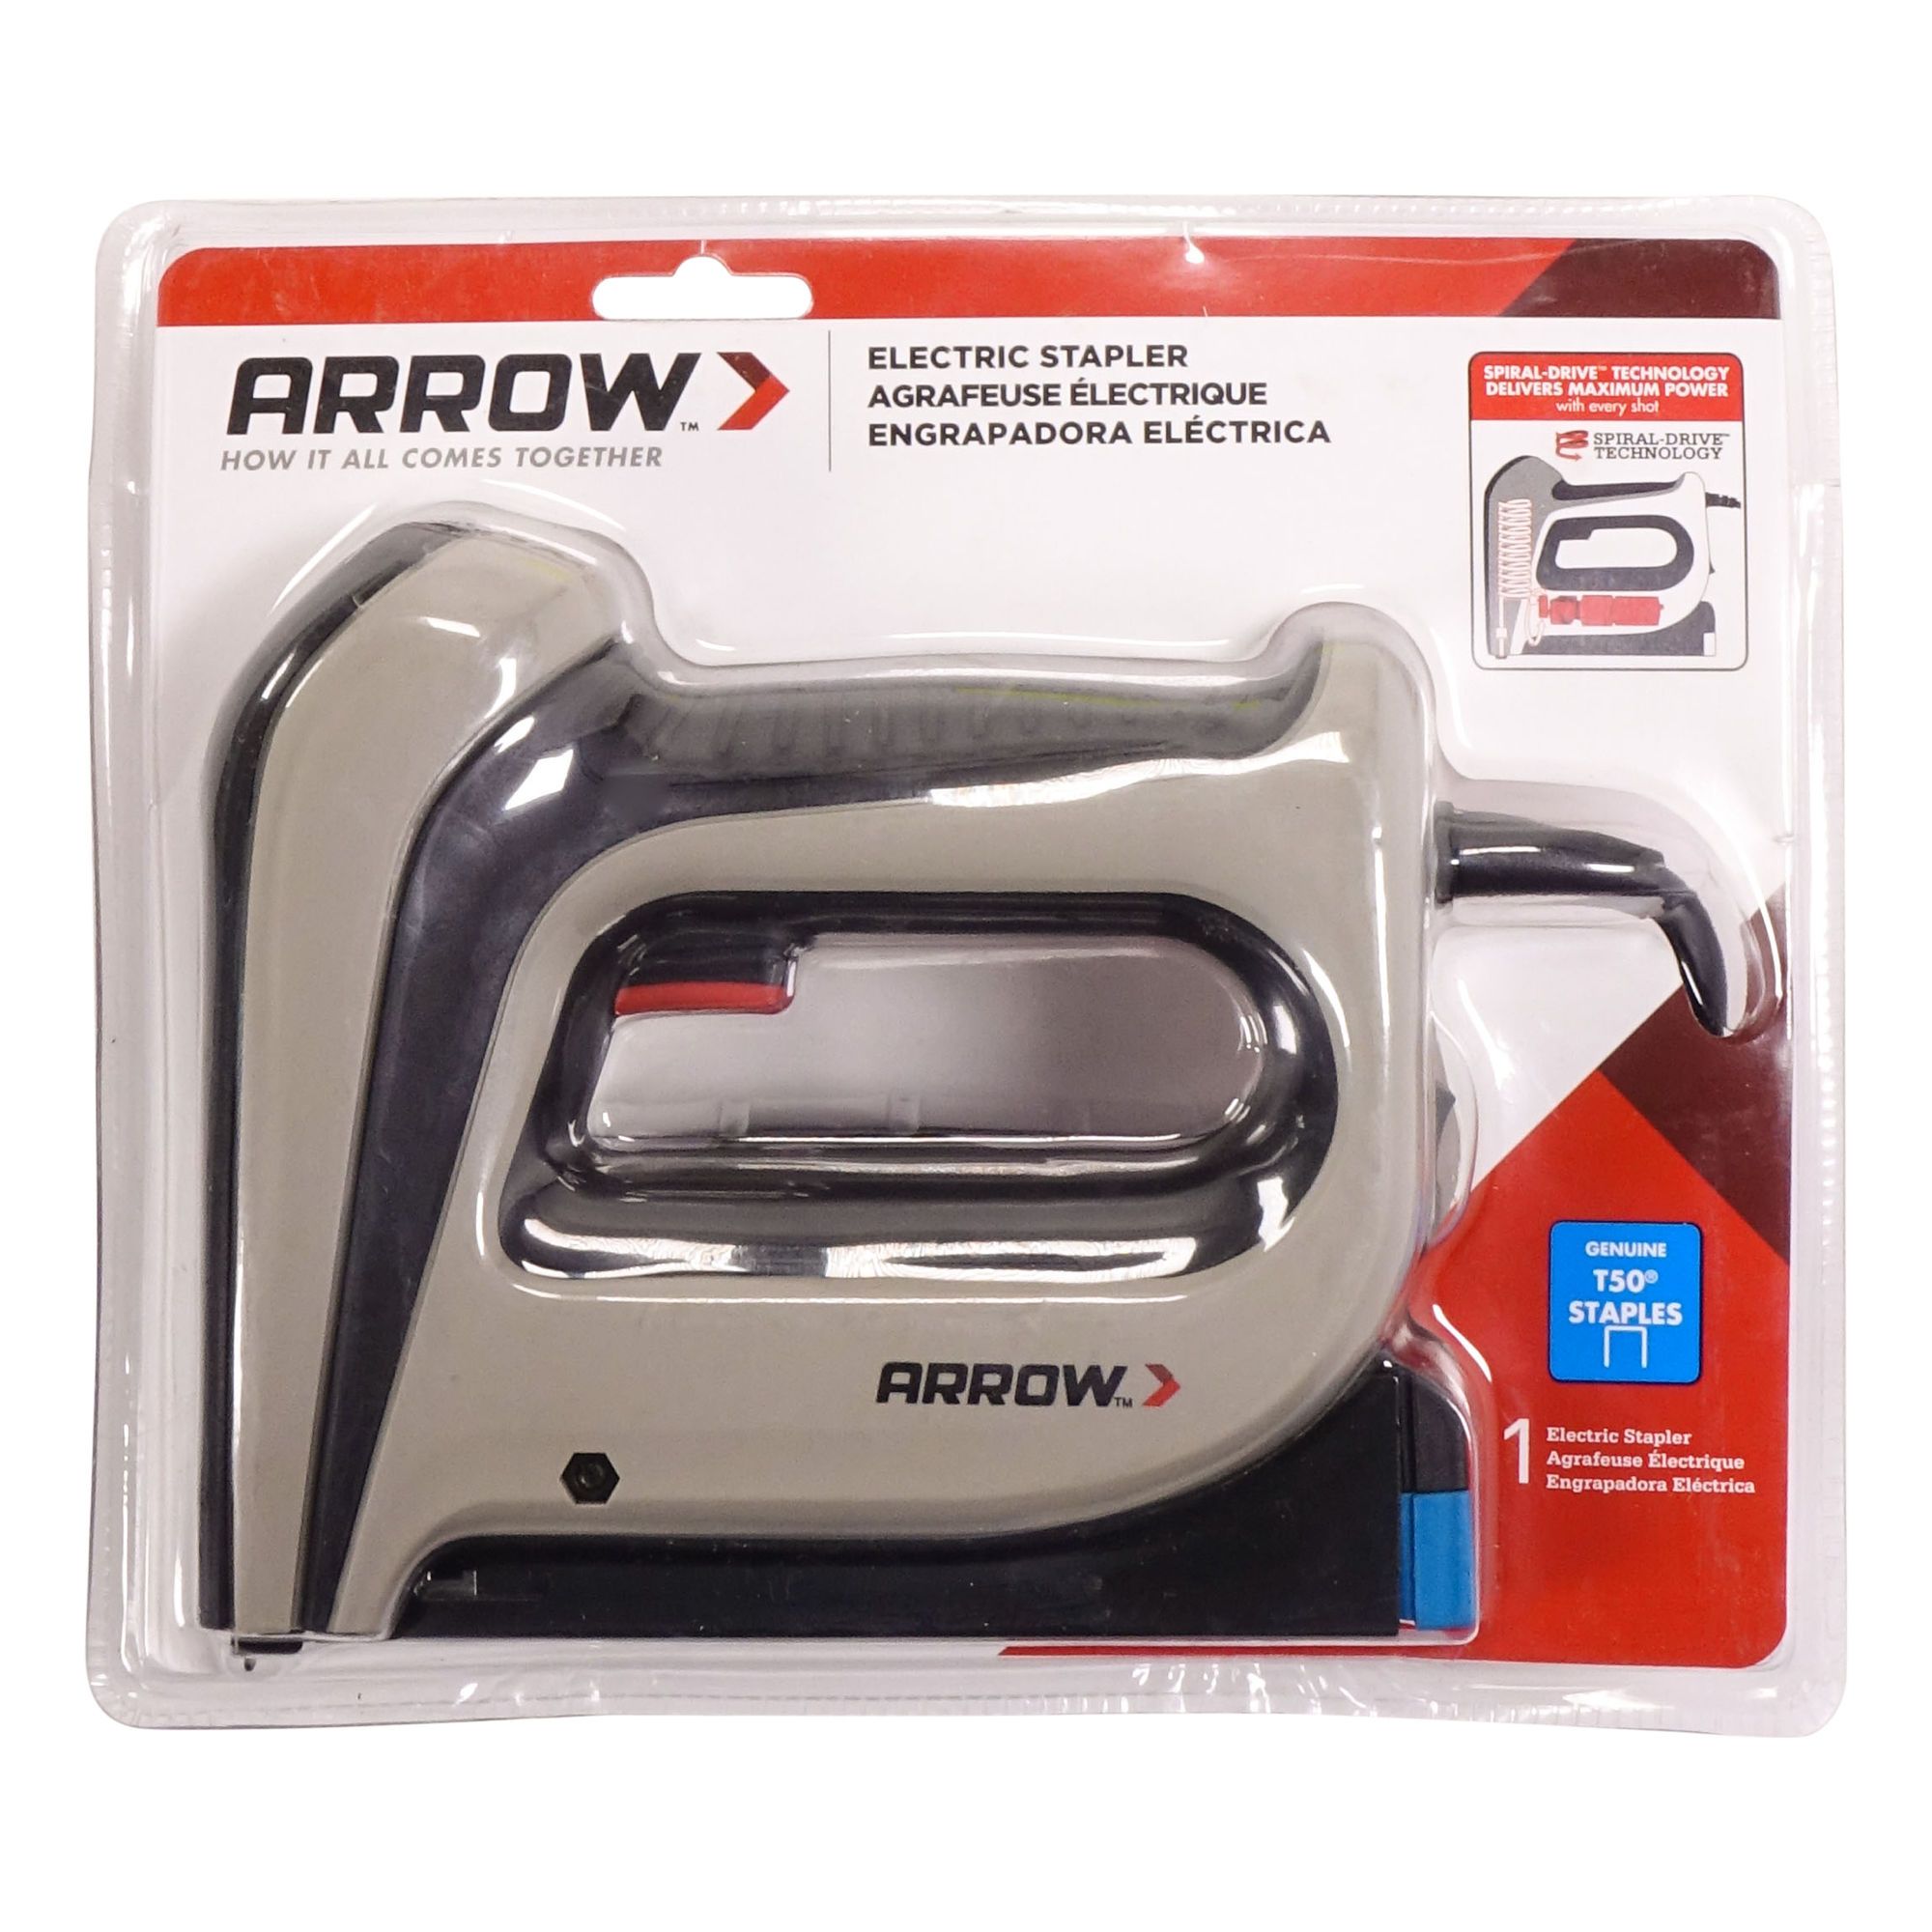 ELECTRIC STAPLE/NAIL GUN BY ARROW TOOL #ETFX50 (MADE IN THE USA) | eBay